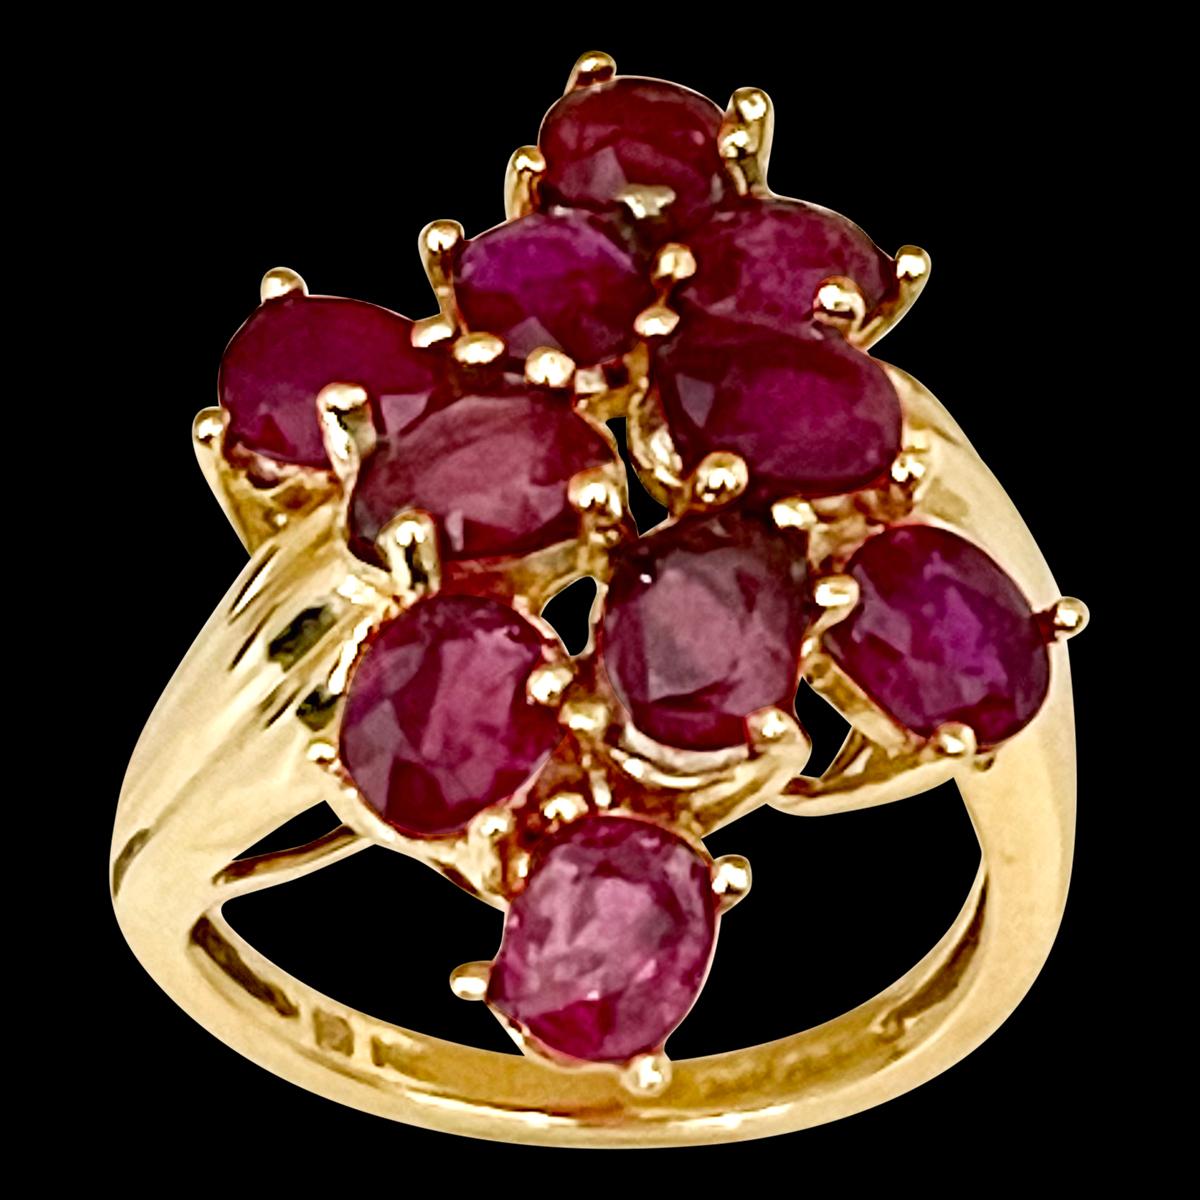 Oval Cut Treated Rubies 3.5 Ct 14 Karat Yellow Gold Ring, Size 7
Theses rubies are treated
 prong set
14 Karat Yellow Gold: 6  gram
Ring Size 7 ( can be altered for no charge )
Simple ring for the people  who don't like bling of diamonds
Closeout